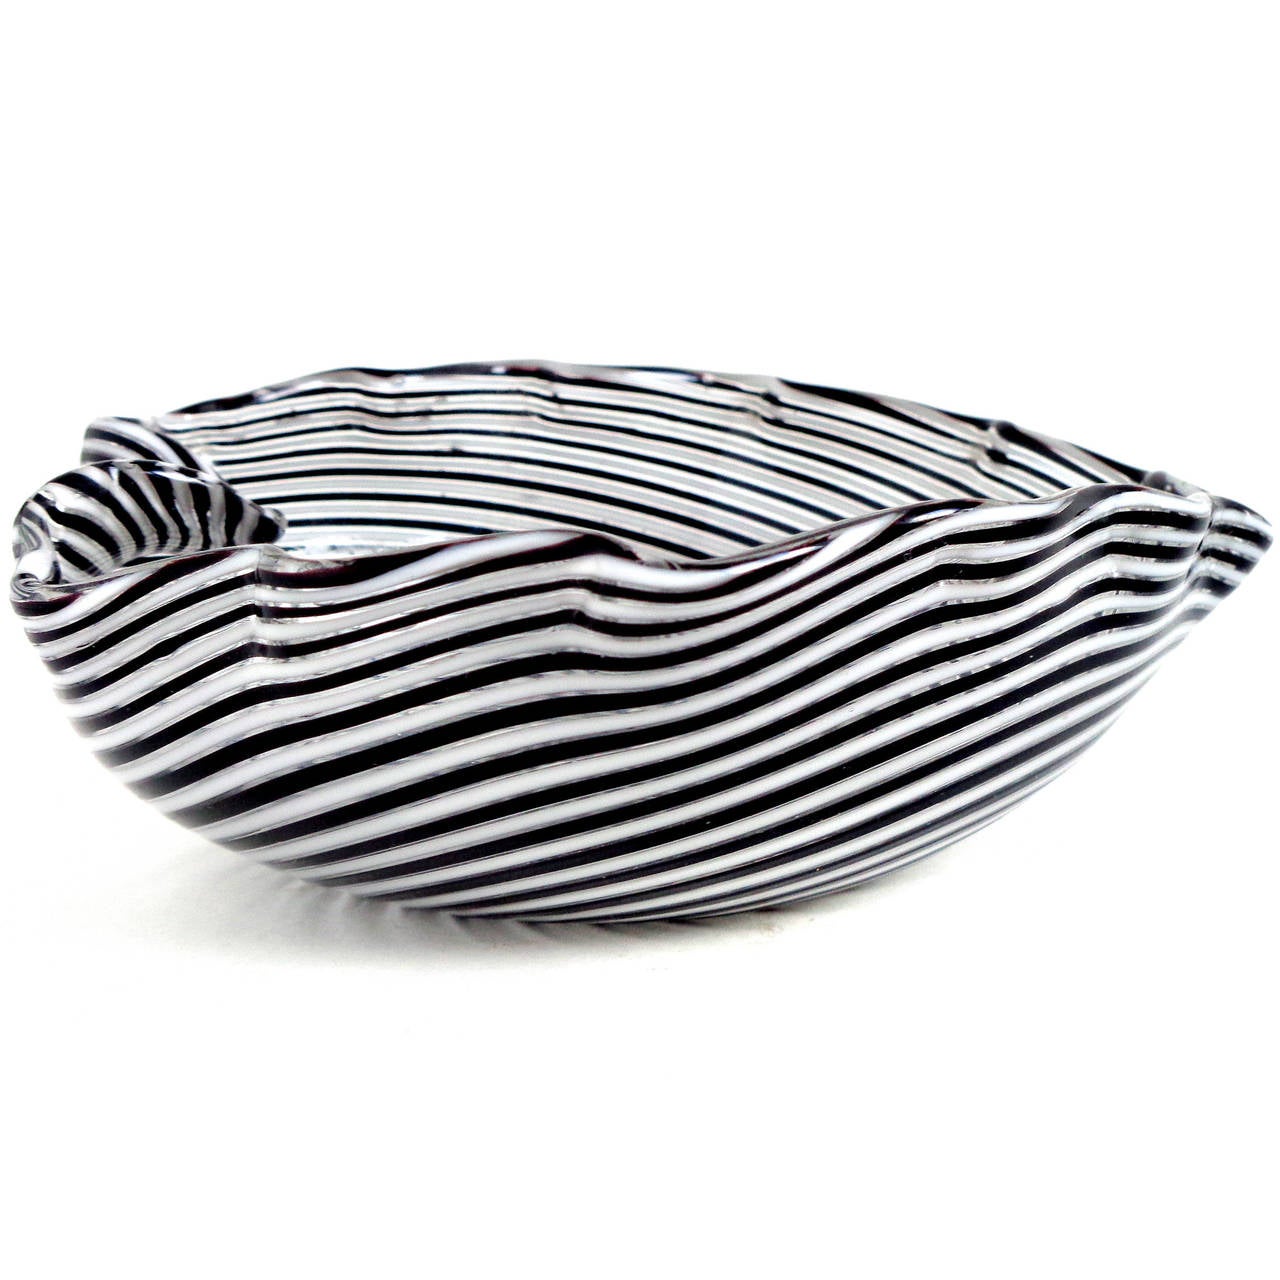 Lovely Murano black and white ribbons, with ruffled rim art glass ring dish or bowl. Documented to designer Dino Martens, for Aureliano Toso. The piece has an optic swirl design, and beautiful shape. Perfect for any side table or Vanity. 

Please